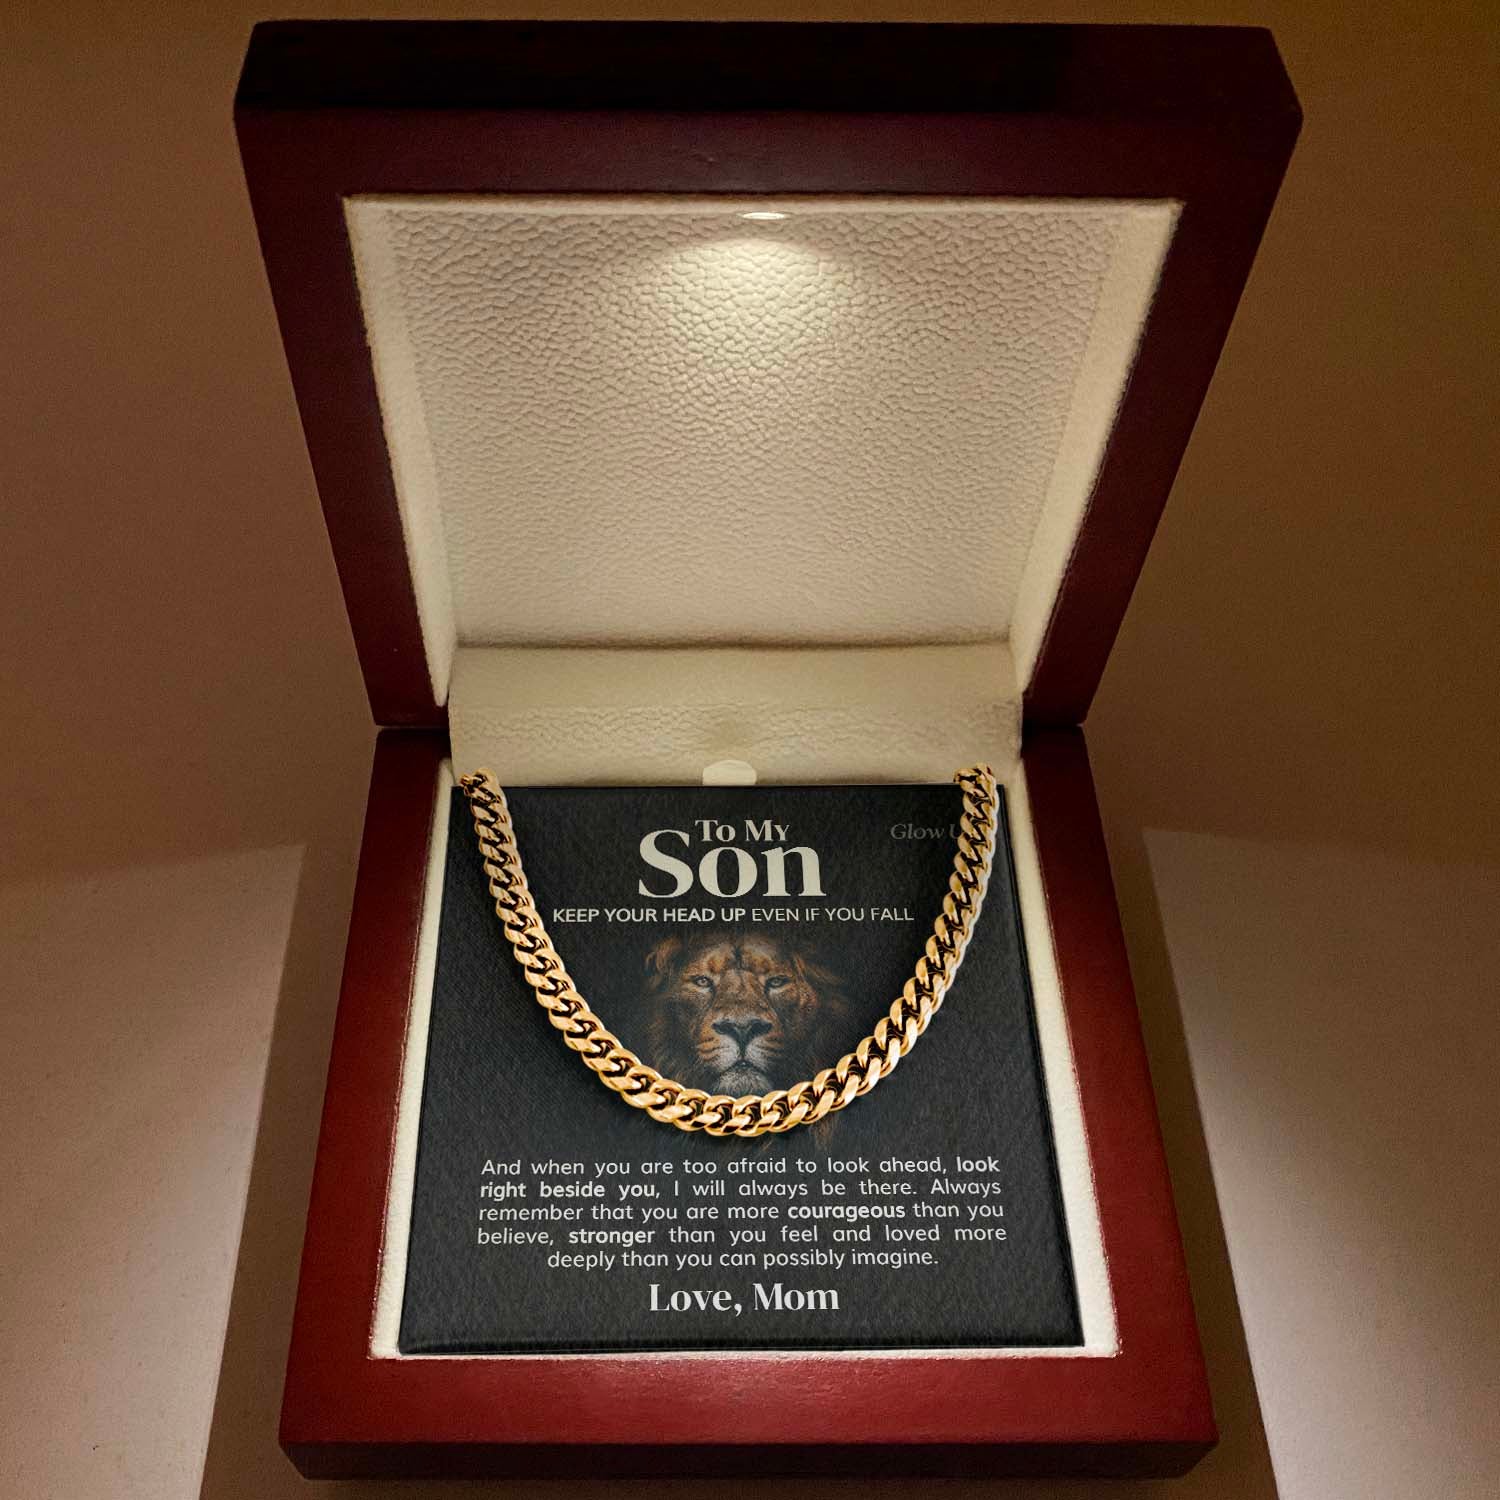 ShineOn Fulfillment Jewelry 14K Yellow Gold Finish / Luxury LED Box To my Son - Keep your head up my son - Cuban Link Chain Necklace